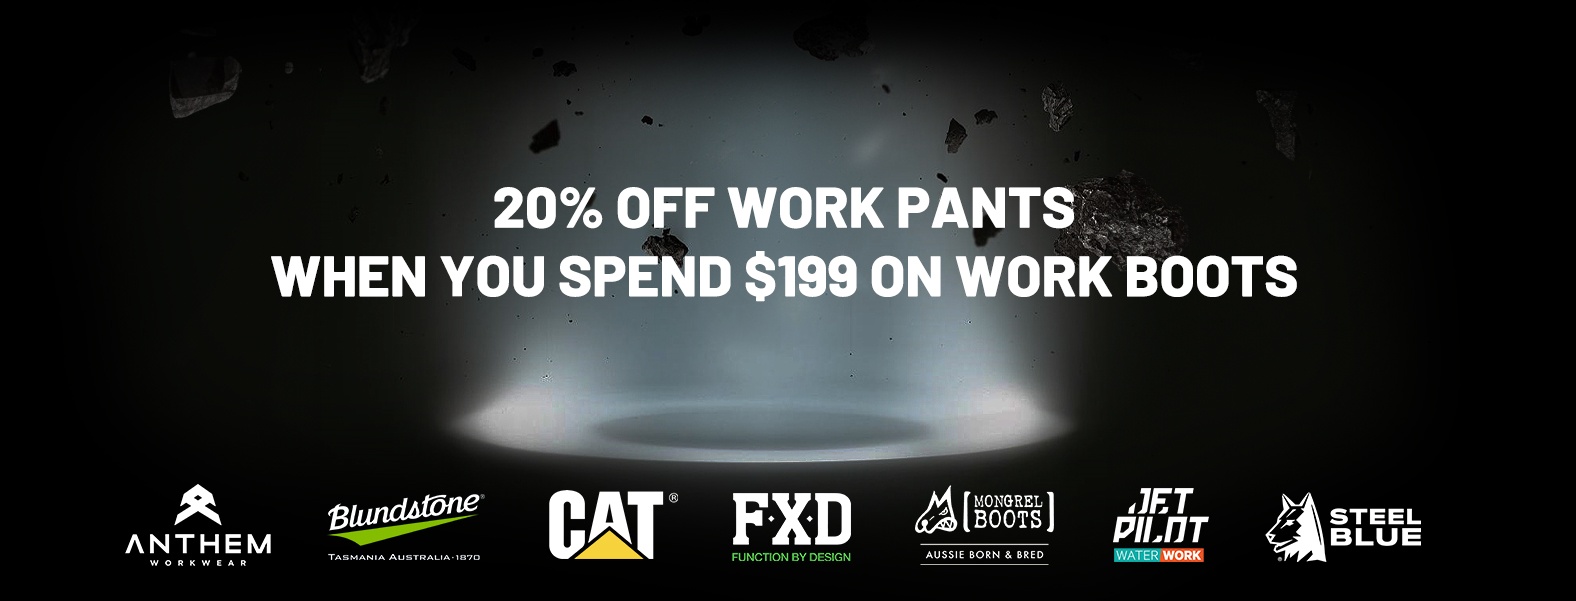 text in light saying 20% off work pants